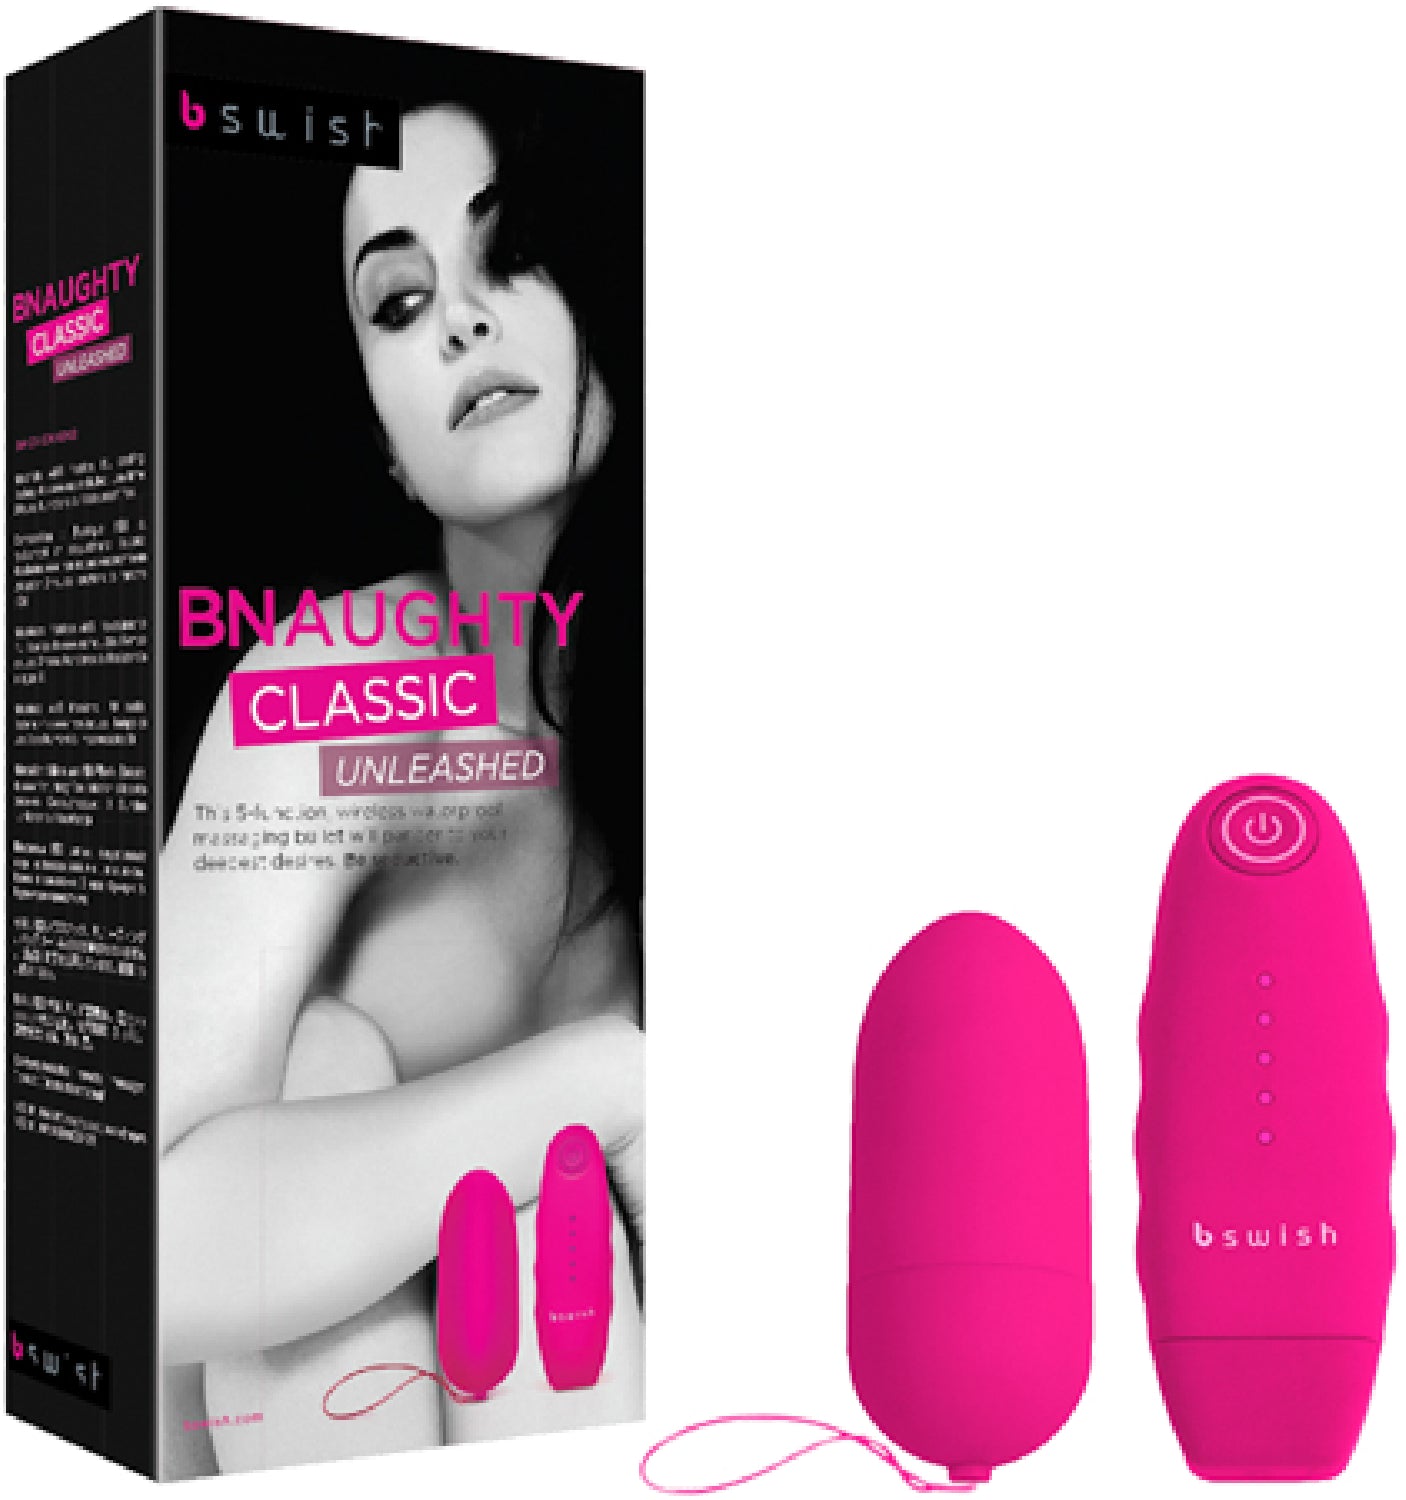 Bnaughty - Classic Unleashed - Grape Pink - Club X